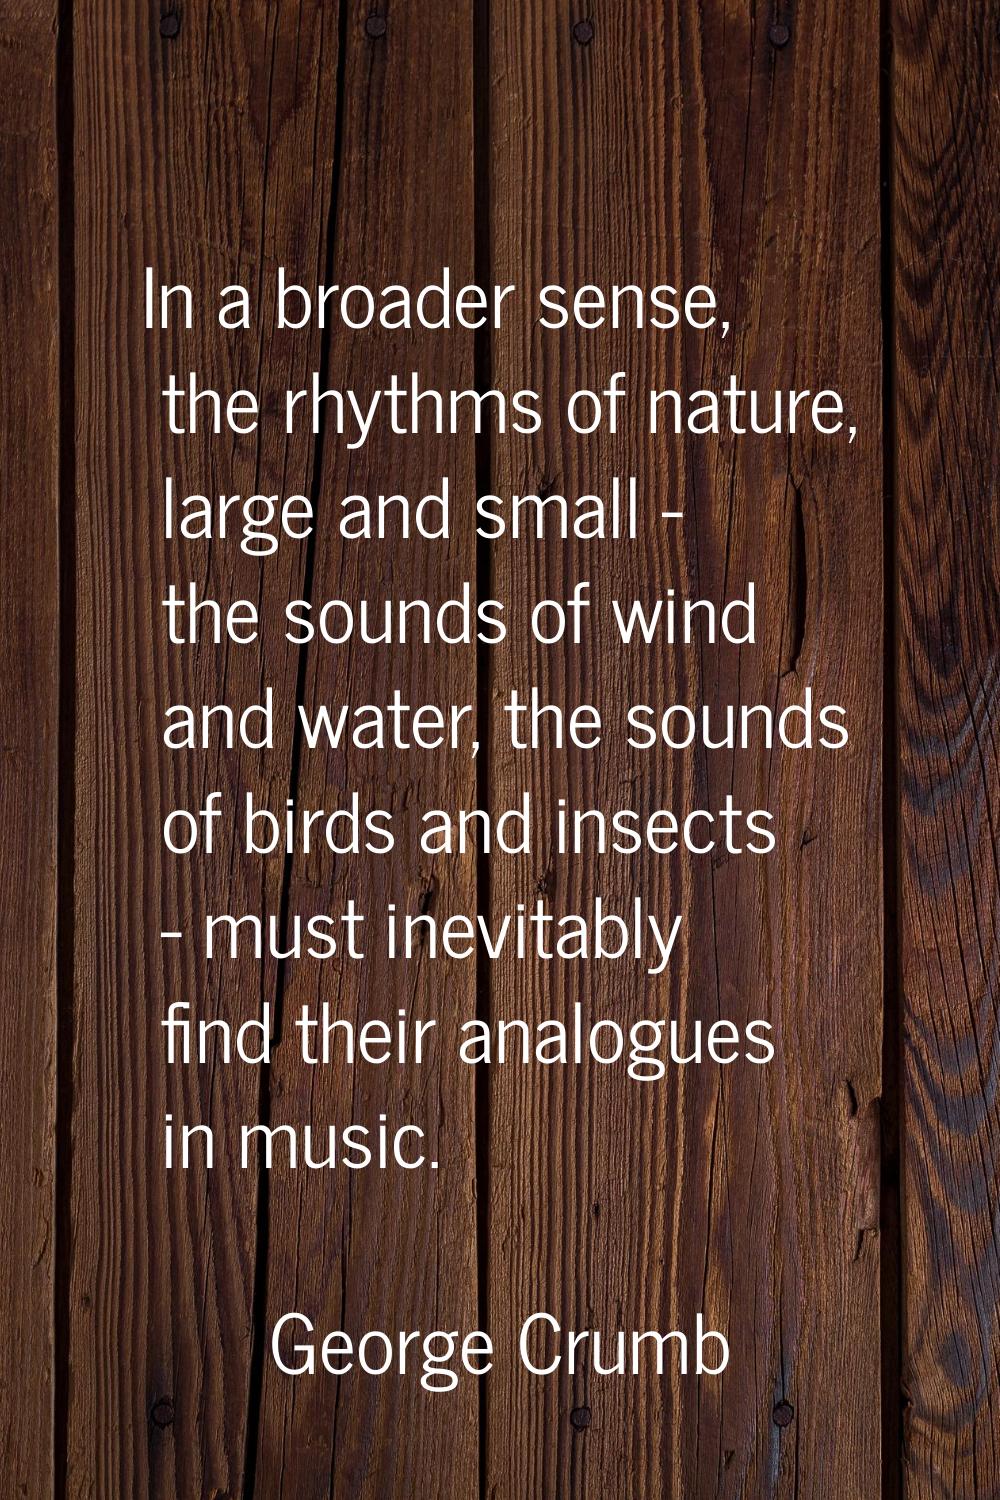 In a broader sense, the rhythms of nature, large and small - the sounds of wind and water, the soun